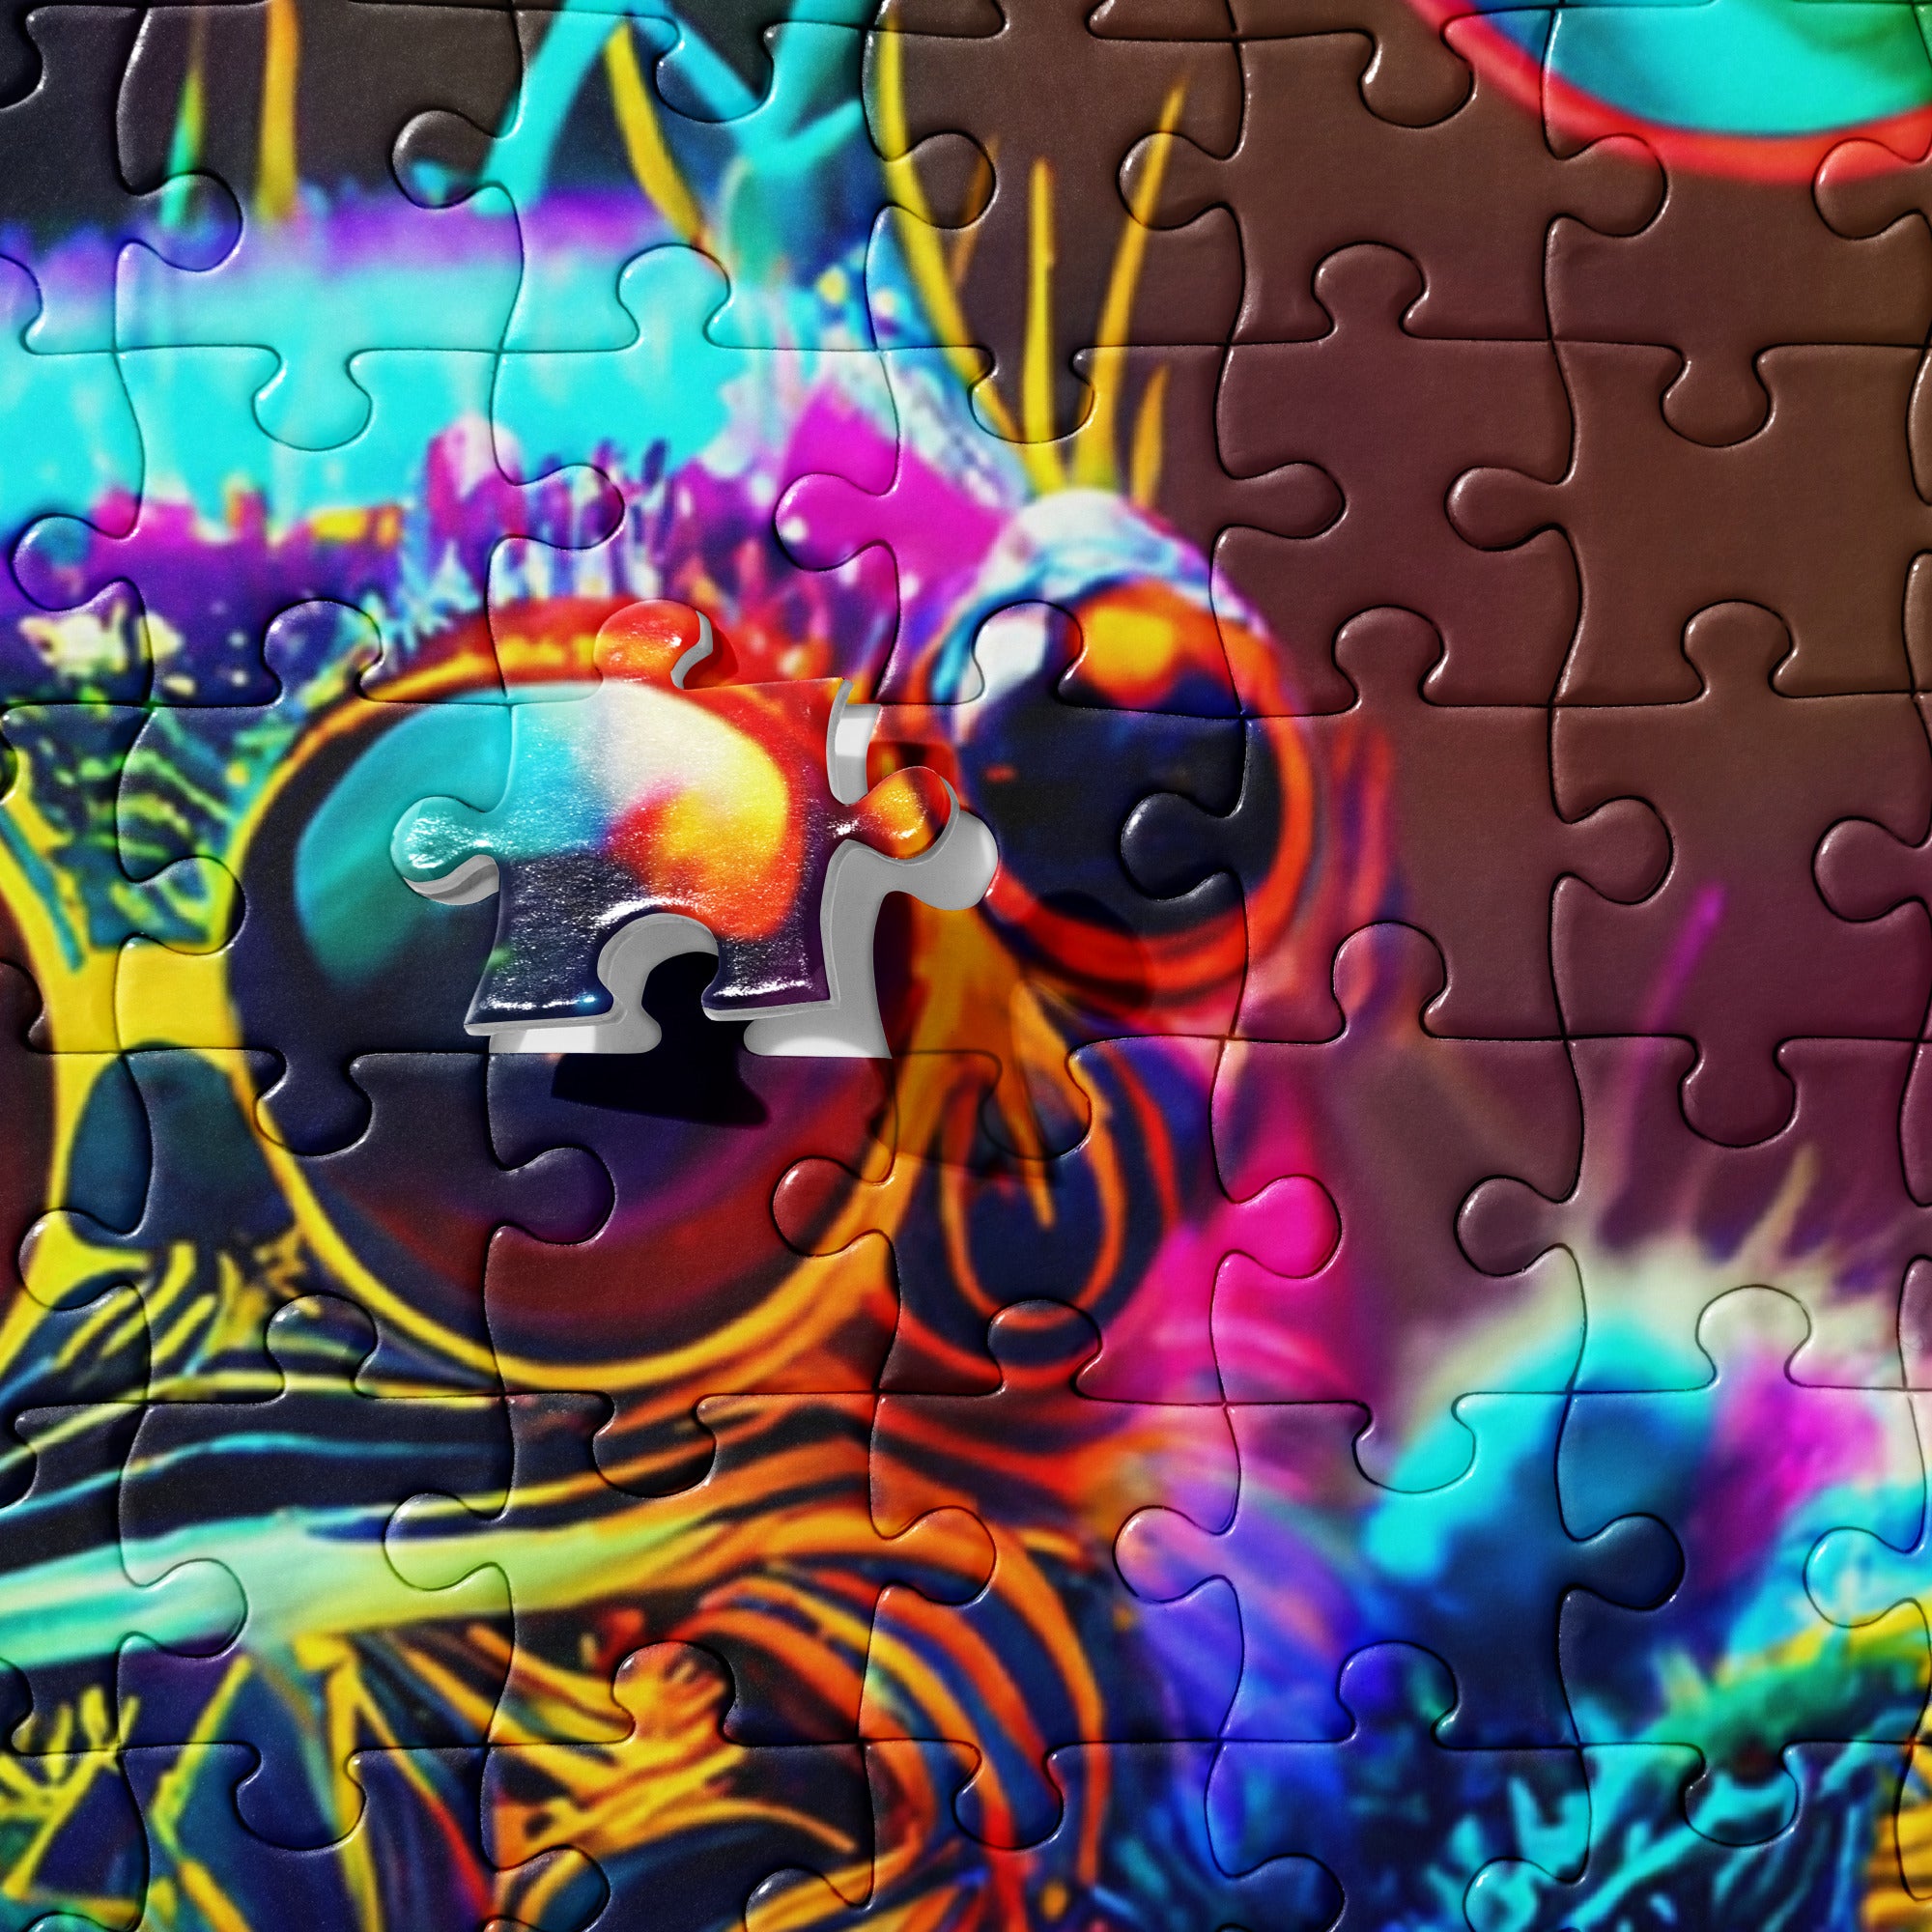 Trippy Jumping Spider Jigsaw puzzle - Jumping Spiders For Sale - Spiders Source - #1 Regal Jumping Spider Store